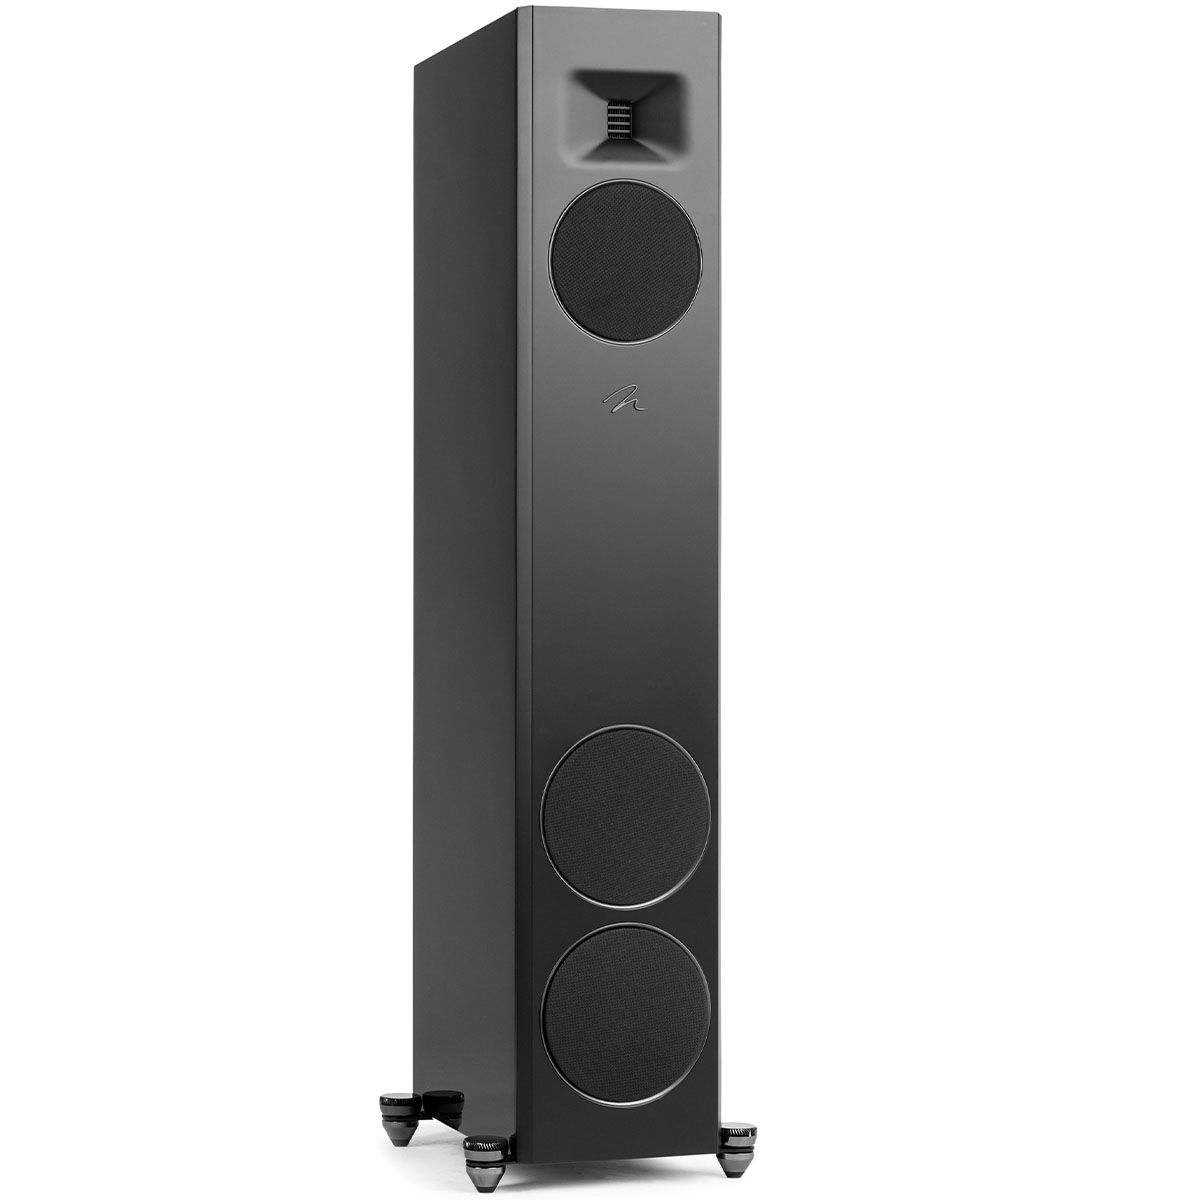 MartinLogan Motion XT F20 Floorstanding Speaker in black, angled view with grilles on white background